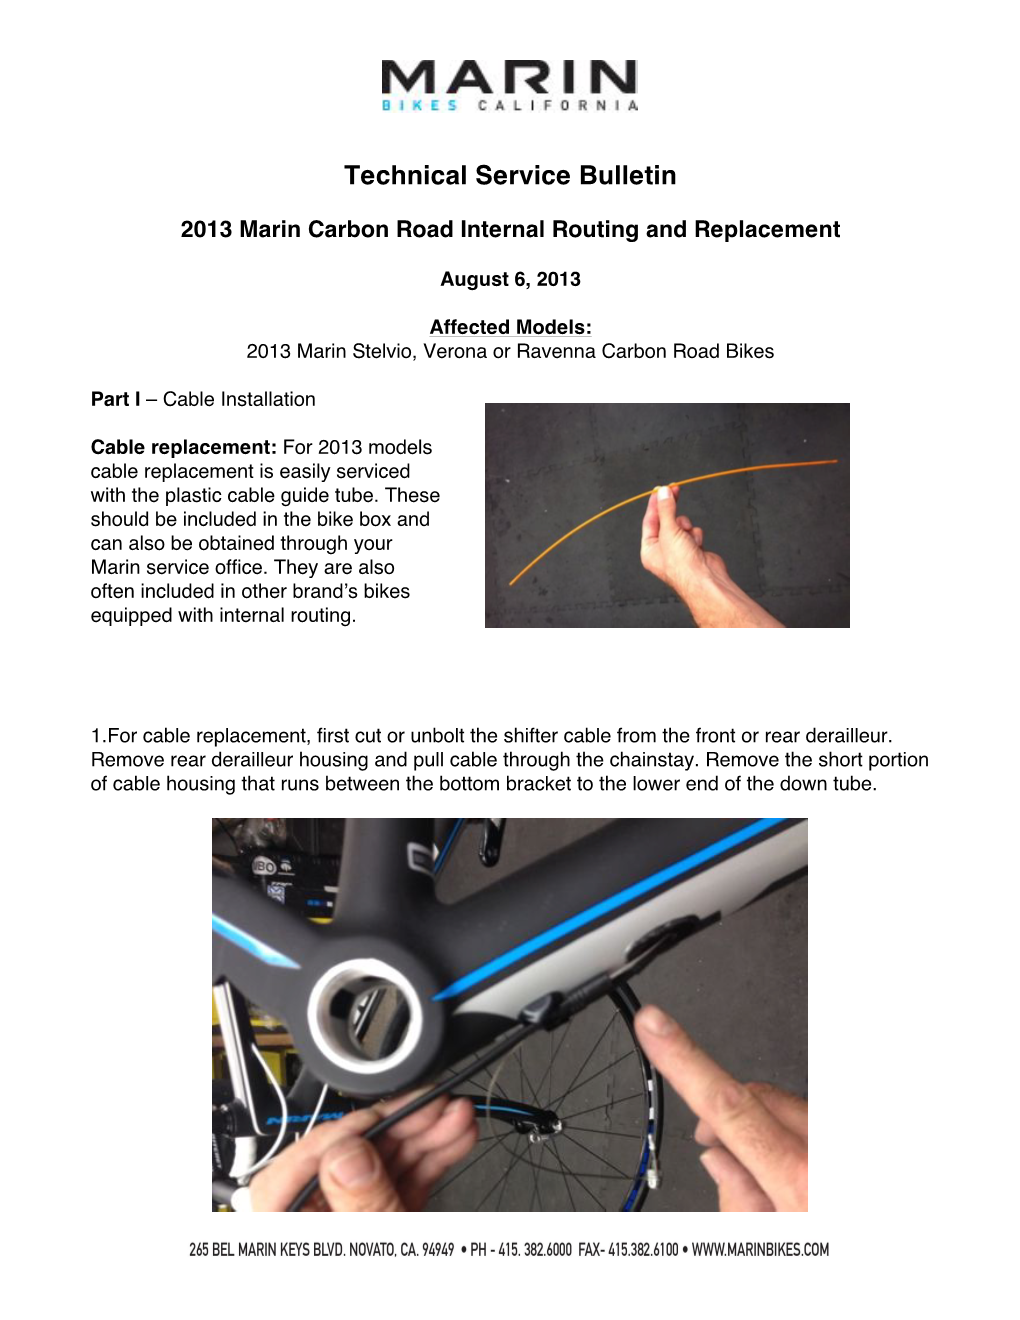 2013 Carbon Road Bike Cable Replacement